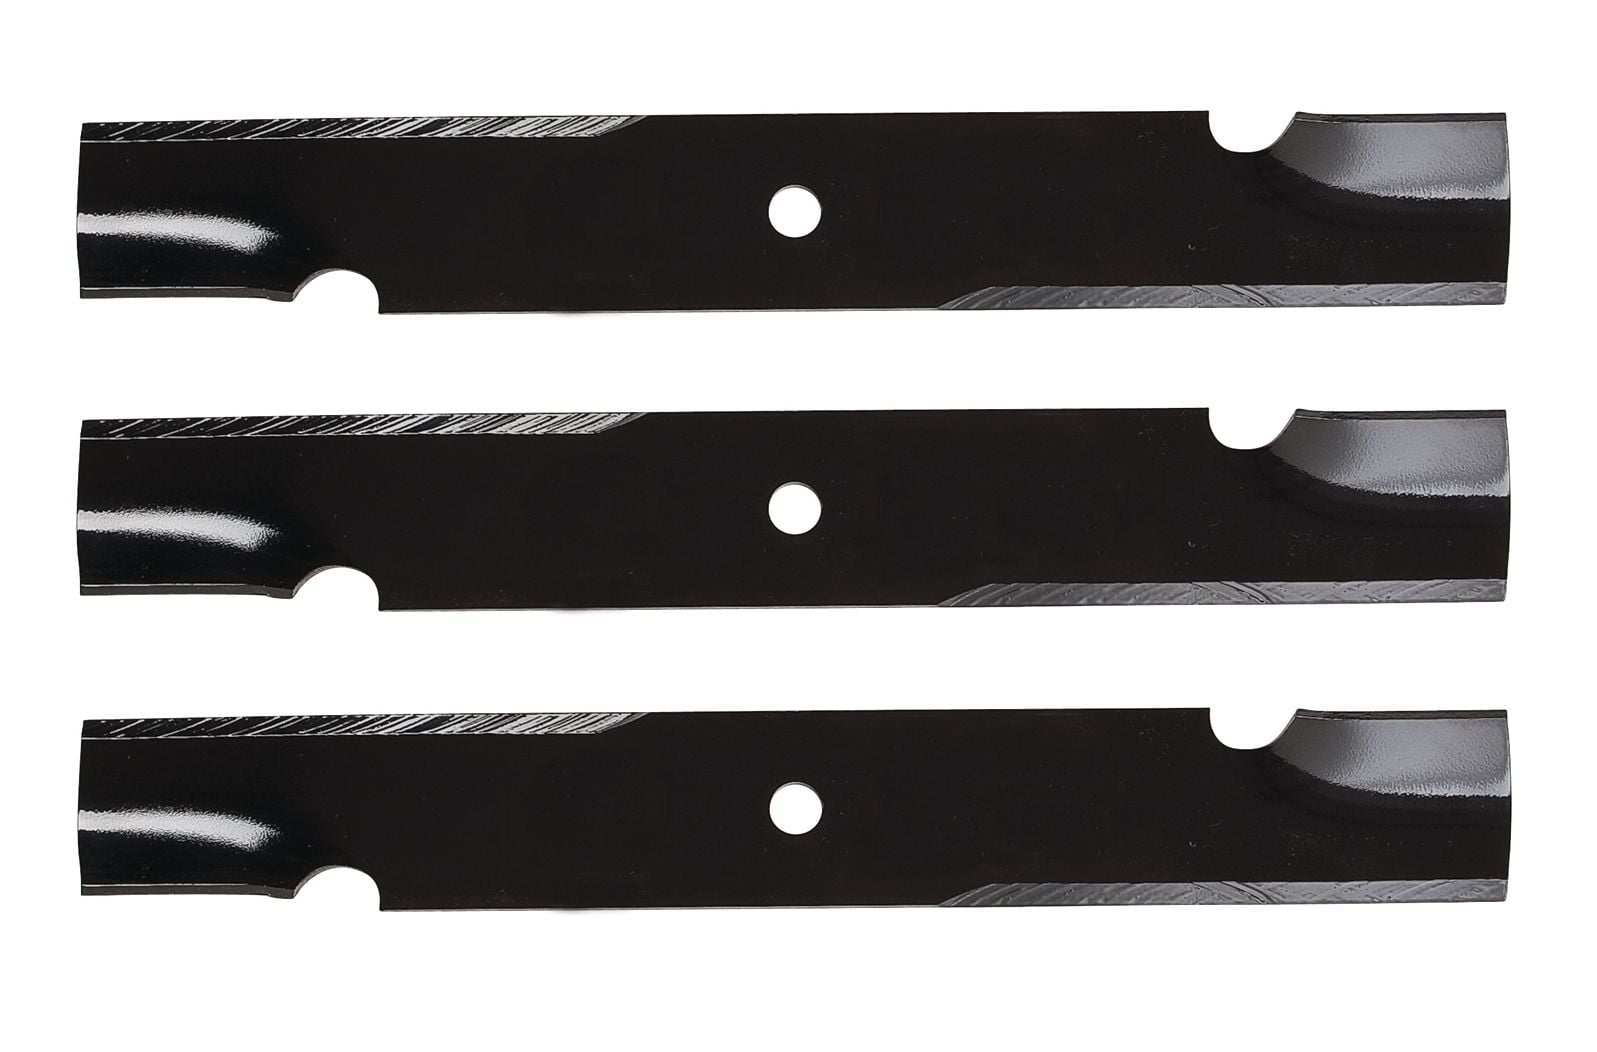 USA MADE 3 Pack Lift Blades for 52" Ferris 5101756 18" x 2-1/2"x5/8" 